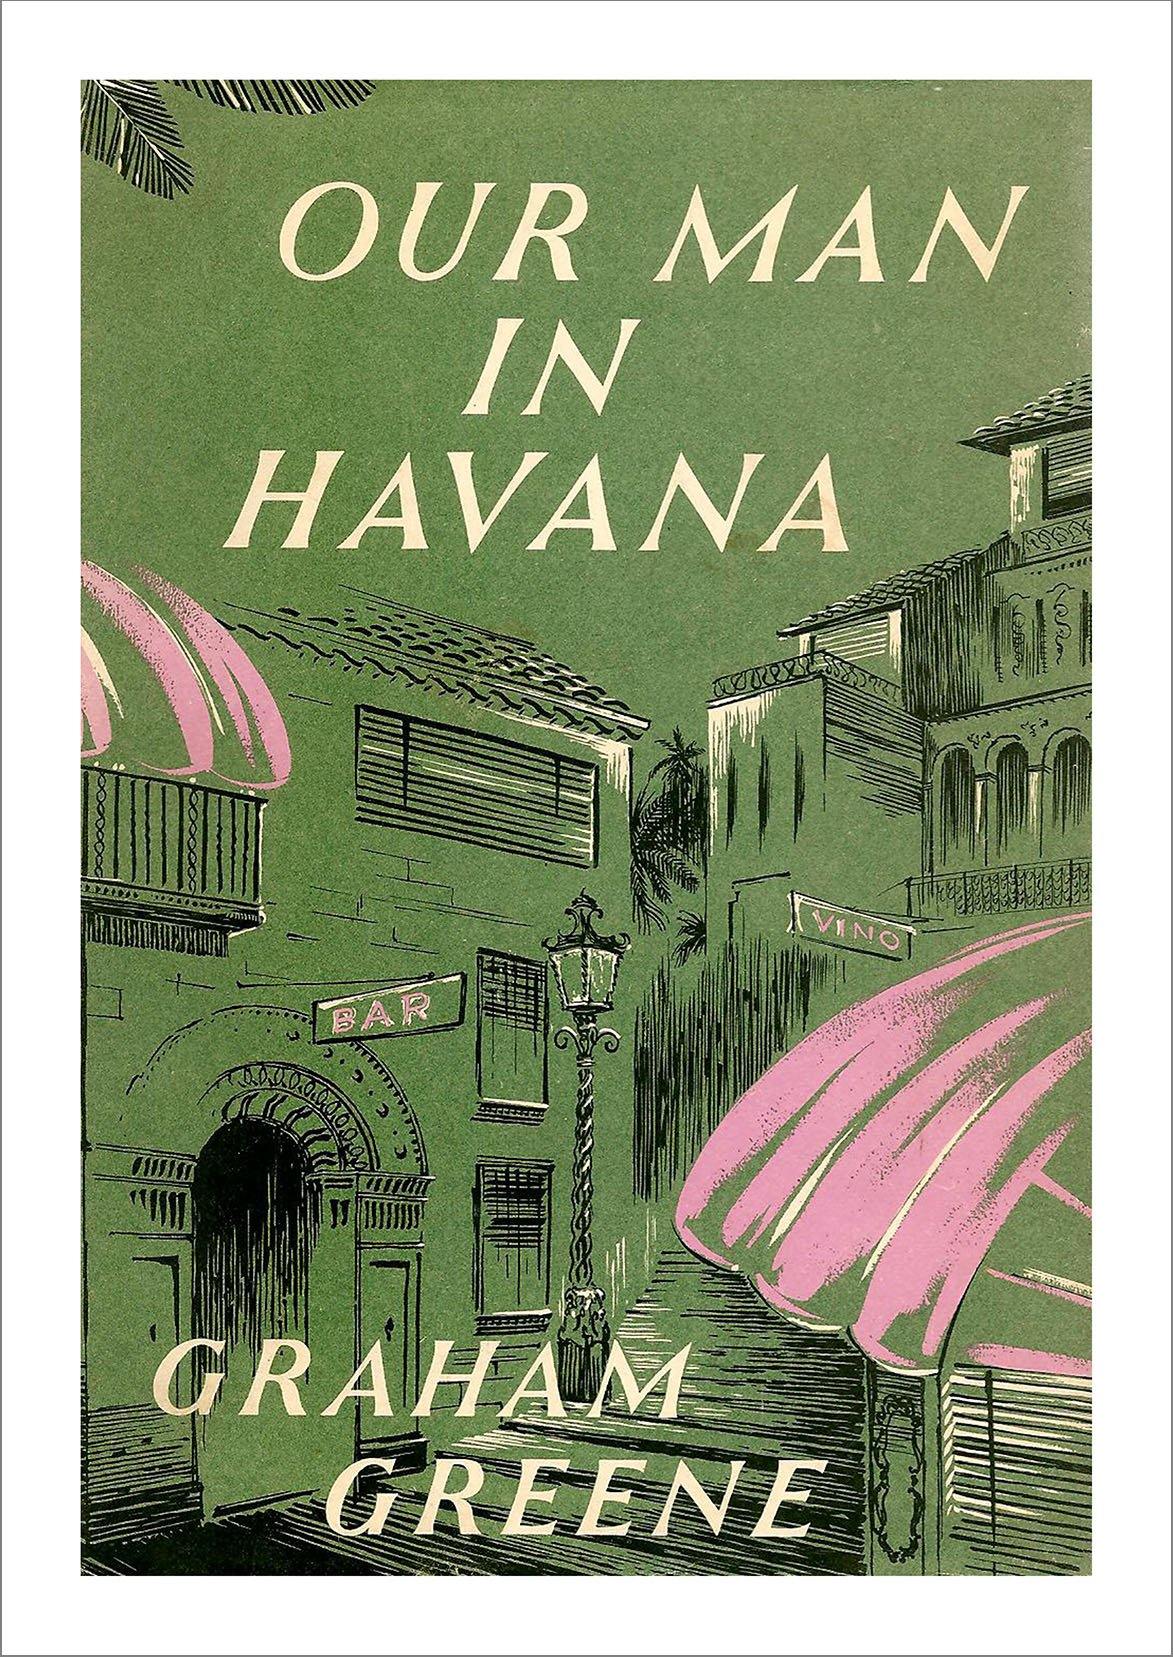 OUR MAN IN HAVANA POSTER: Vintage Book Cover Art Print - The Print Arcade